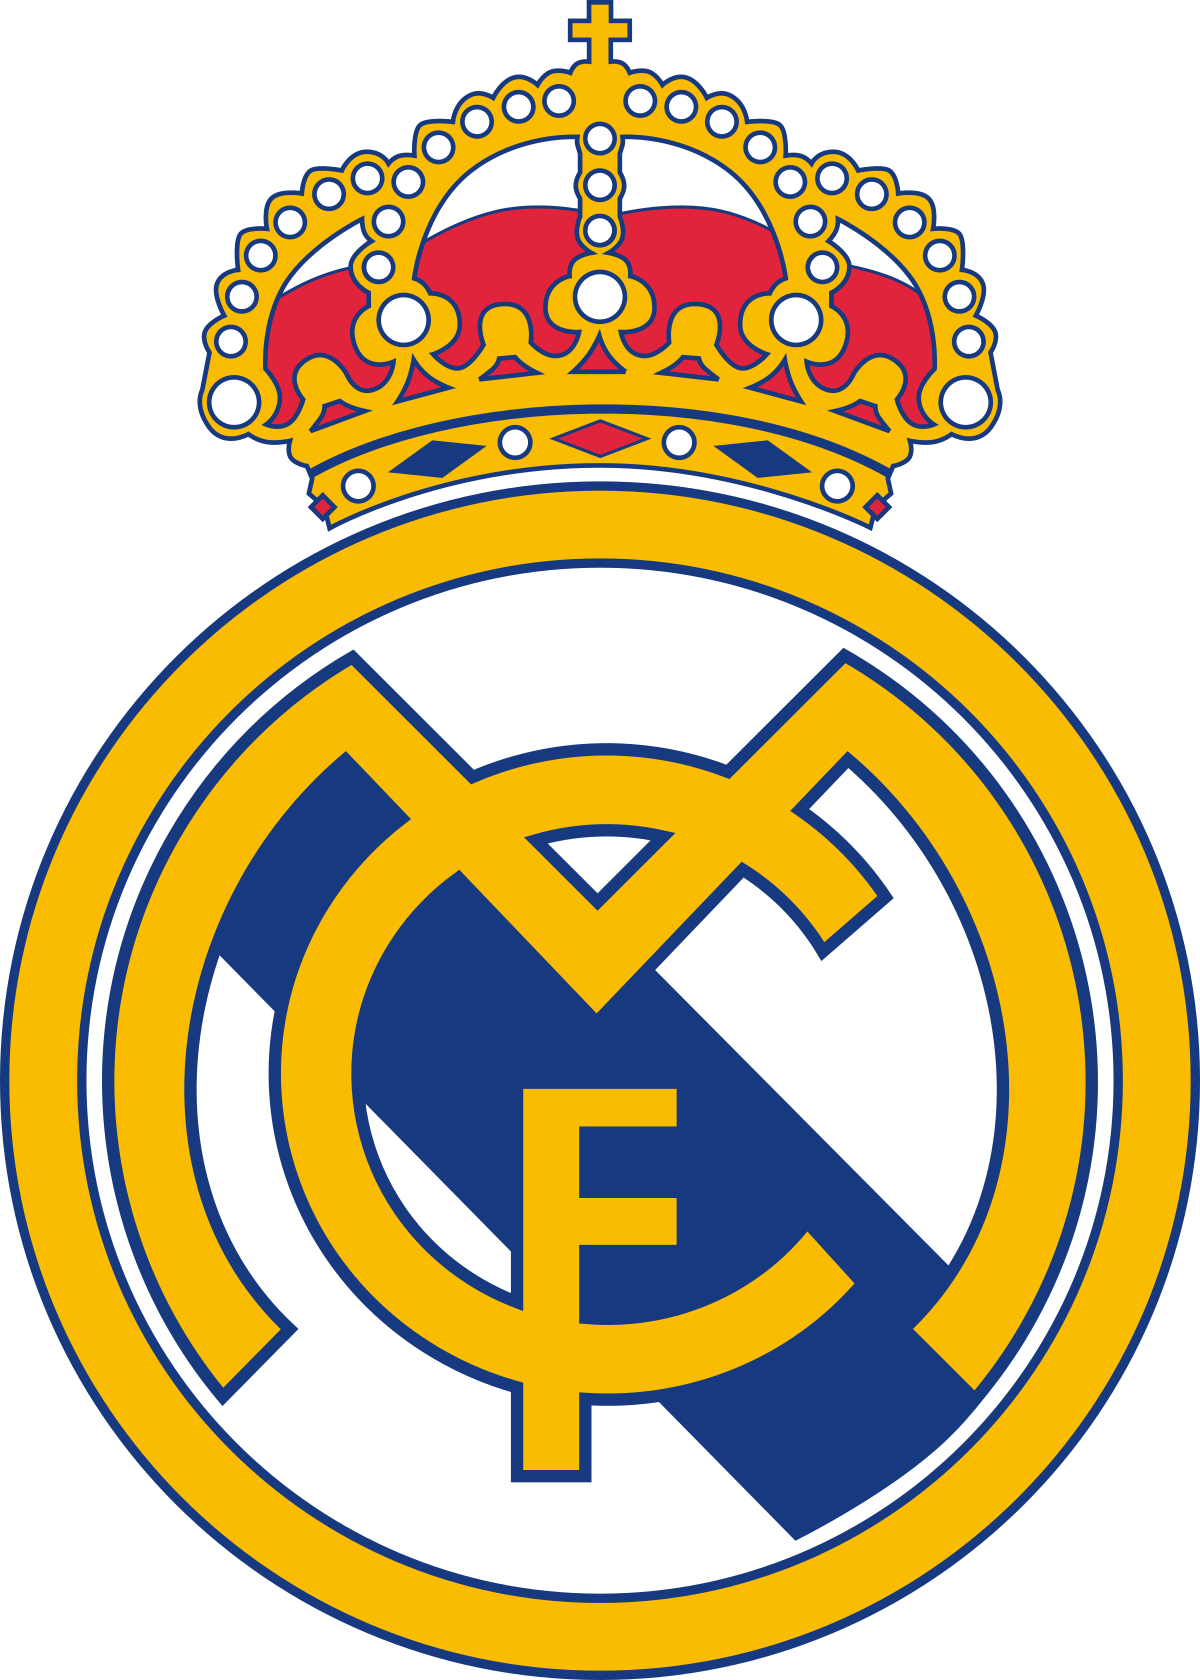 Wallpapers 4k Real Madrid - Real Madrid Wallpaper 4K iPhone Awesome 2024